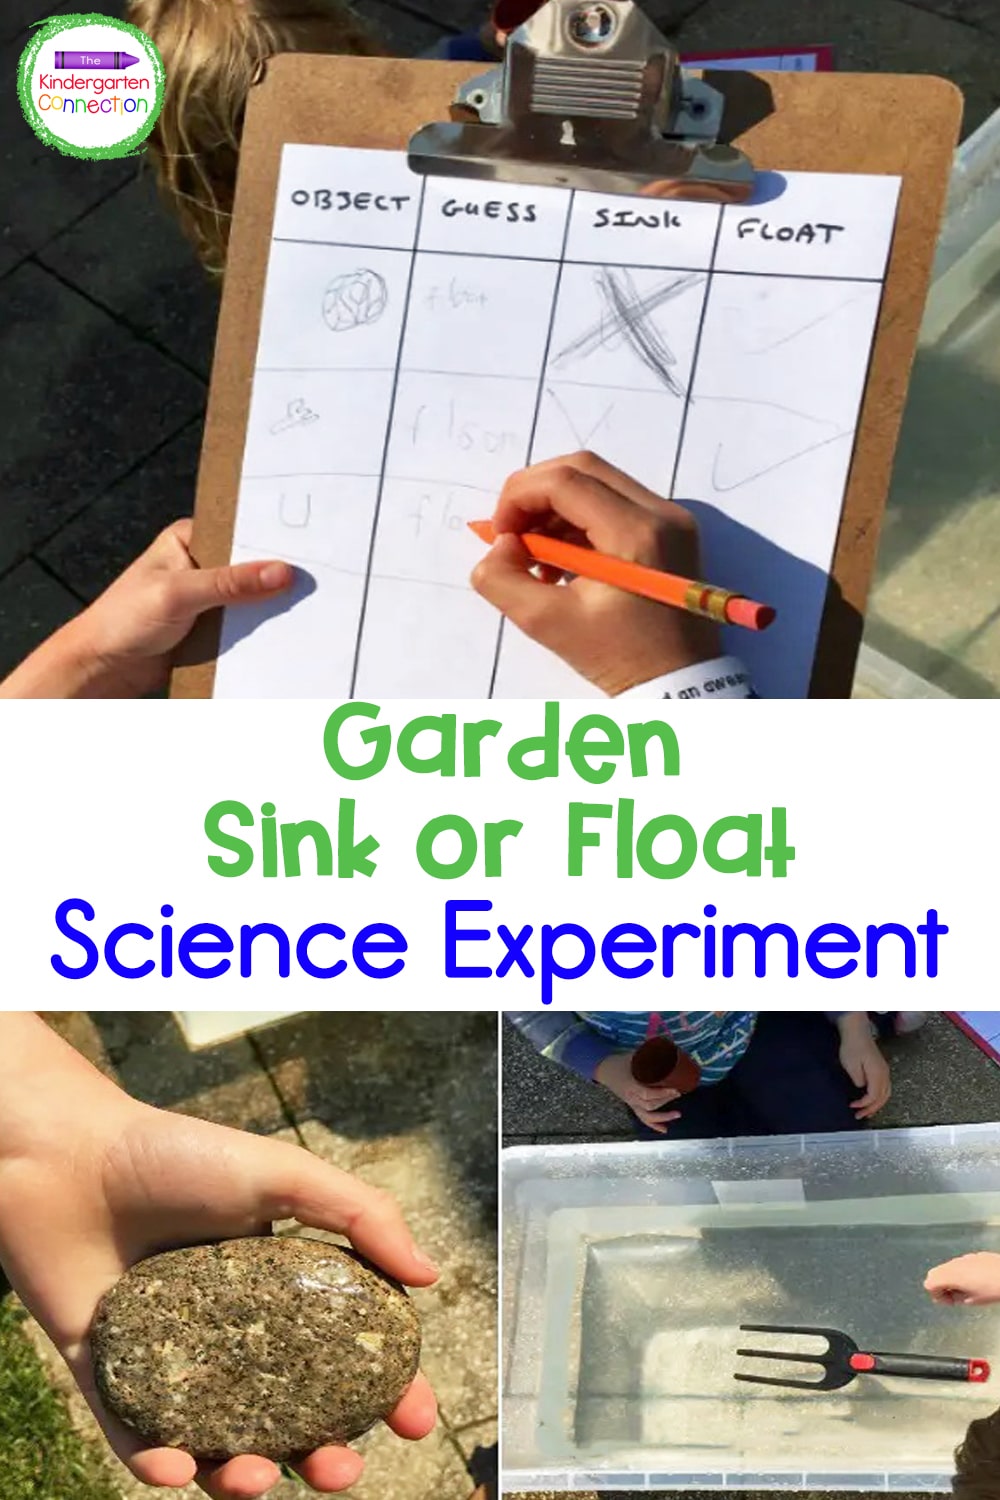 Engage children's natural sense of curiosity and introduce them to the basics of a science experiment in this Garden Sink or Float Activity!